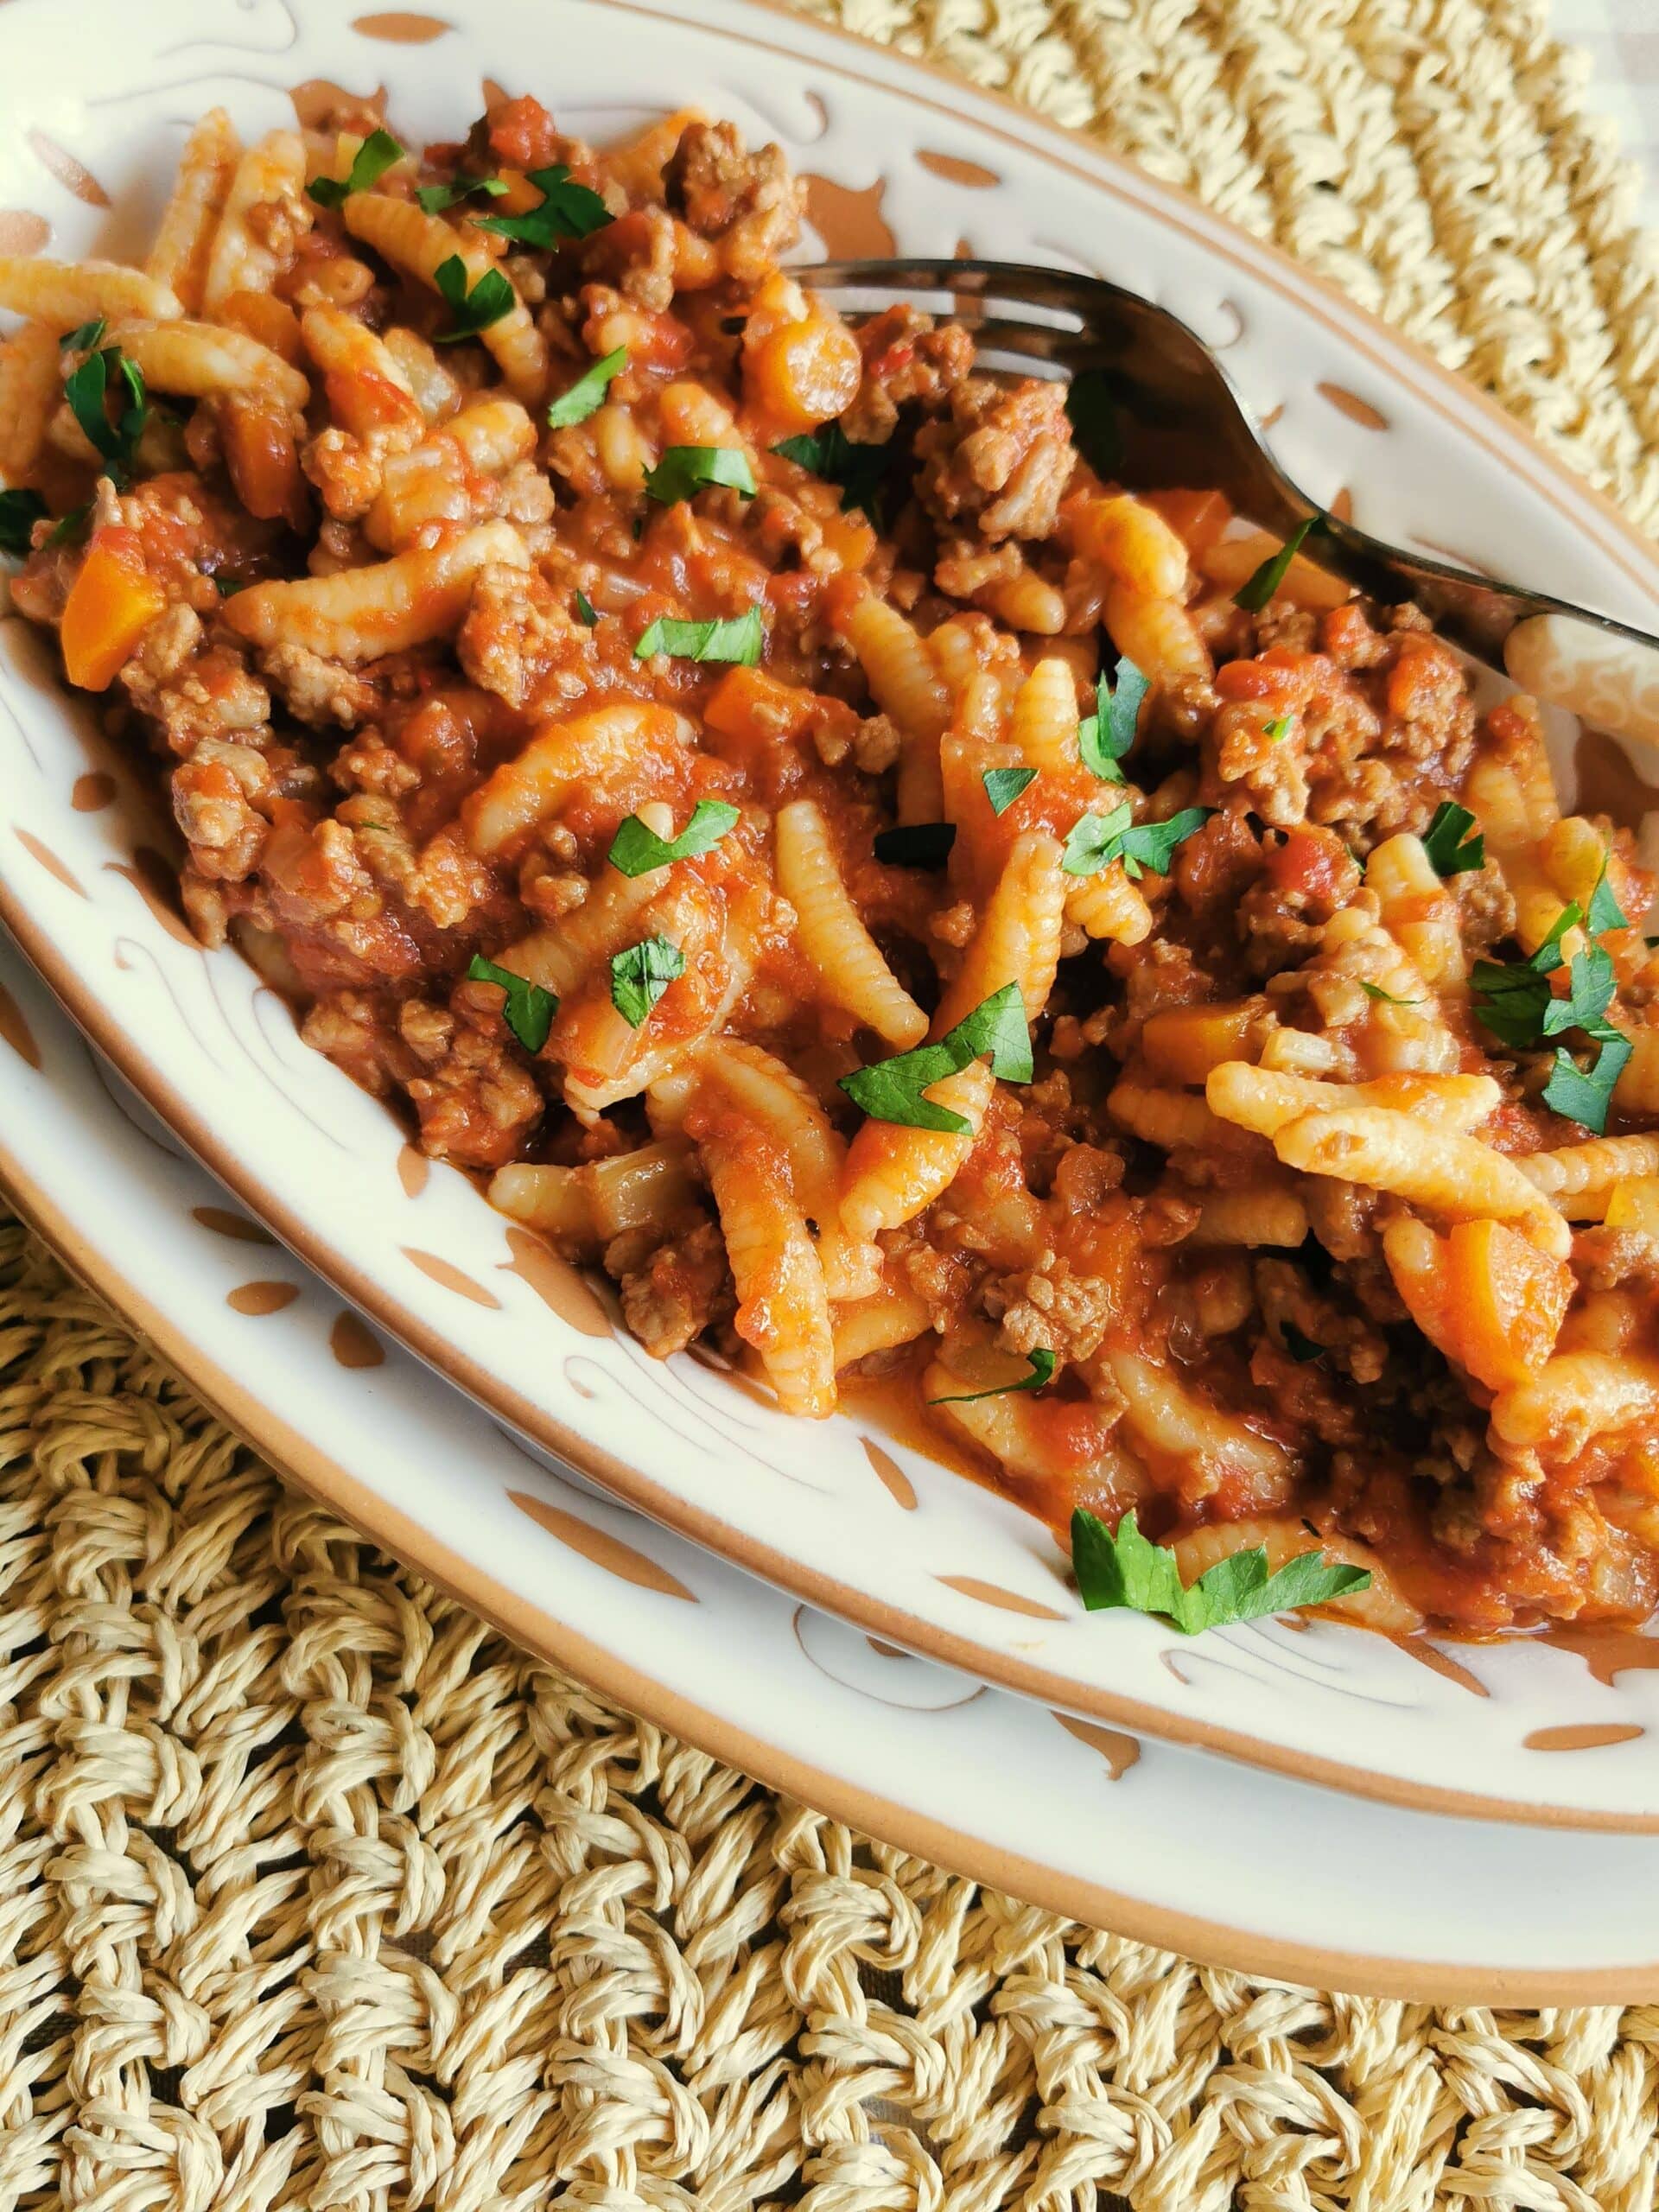 Lamb ragu with pasta on a plate.